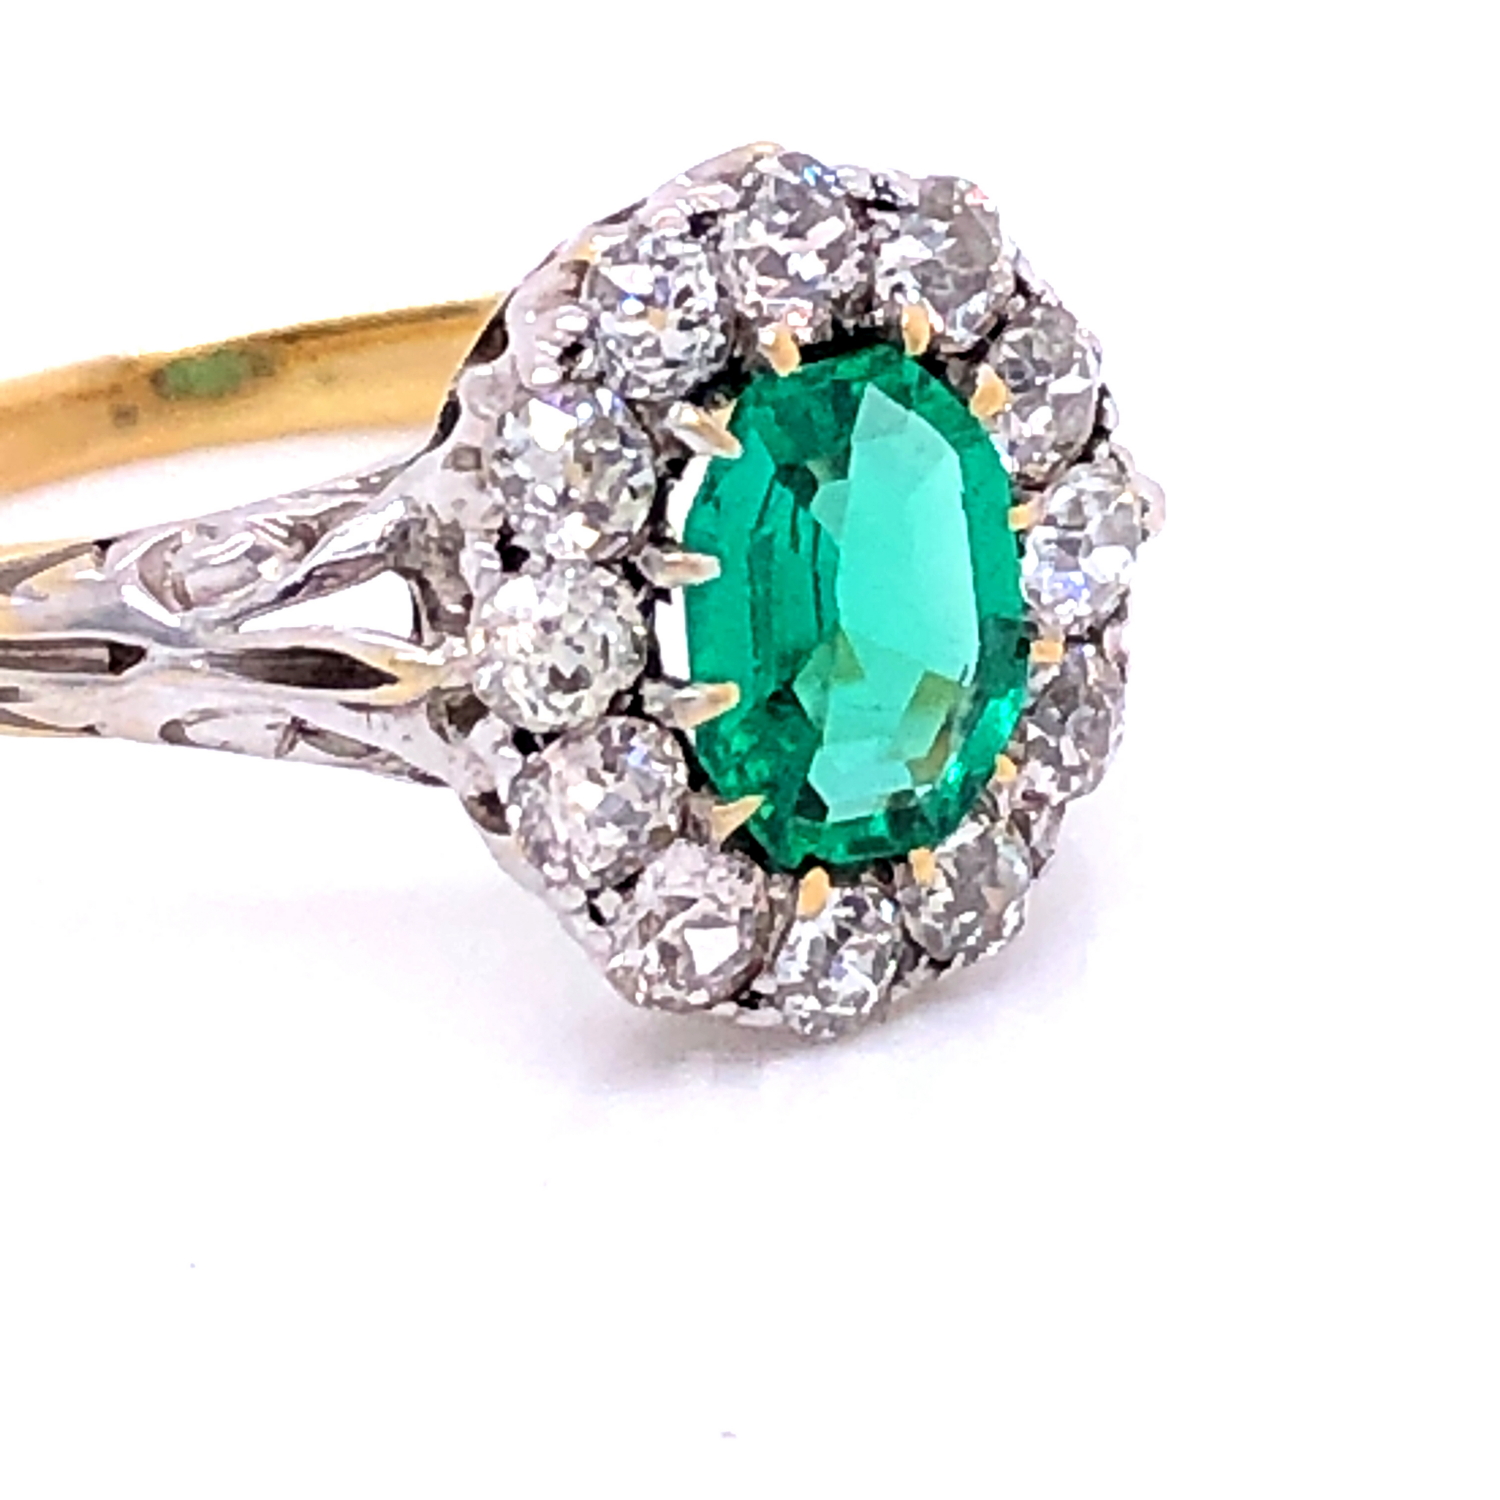 AN EMERALD AND DIAMOND CLUSTER RING. THE PRINCIPLE MIXED CUT EMERALD IN A TWELVE CLAW SETTING - Image 3 of 17